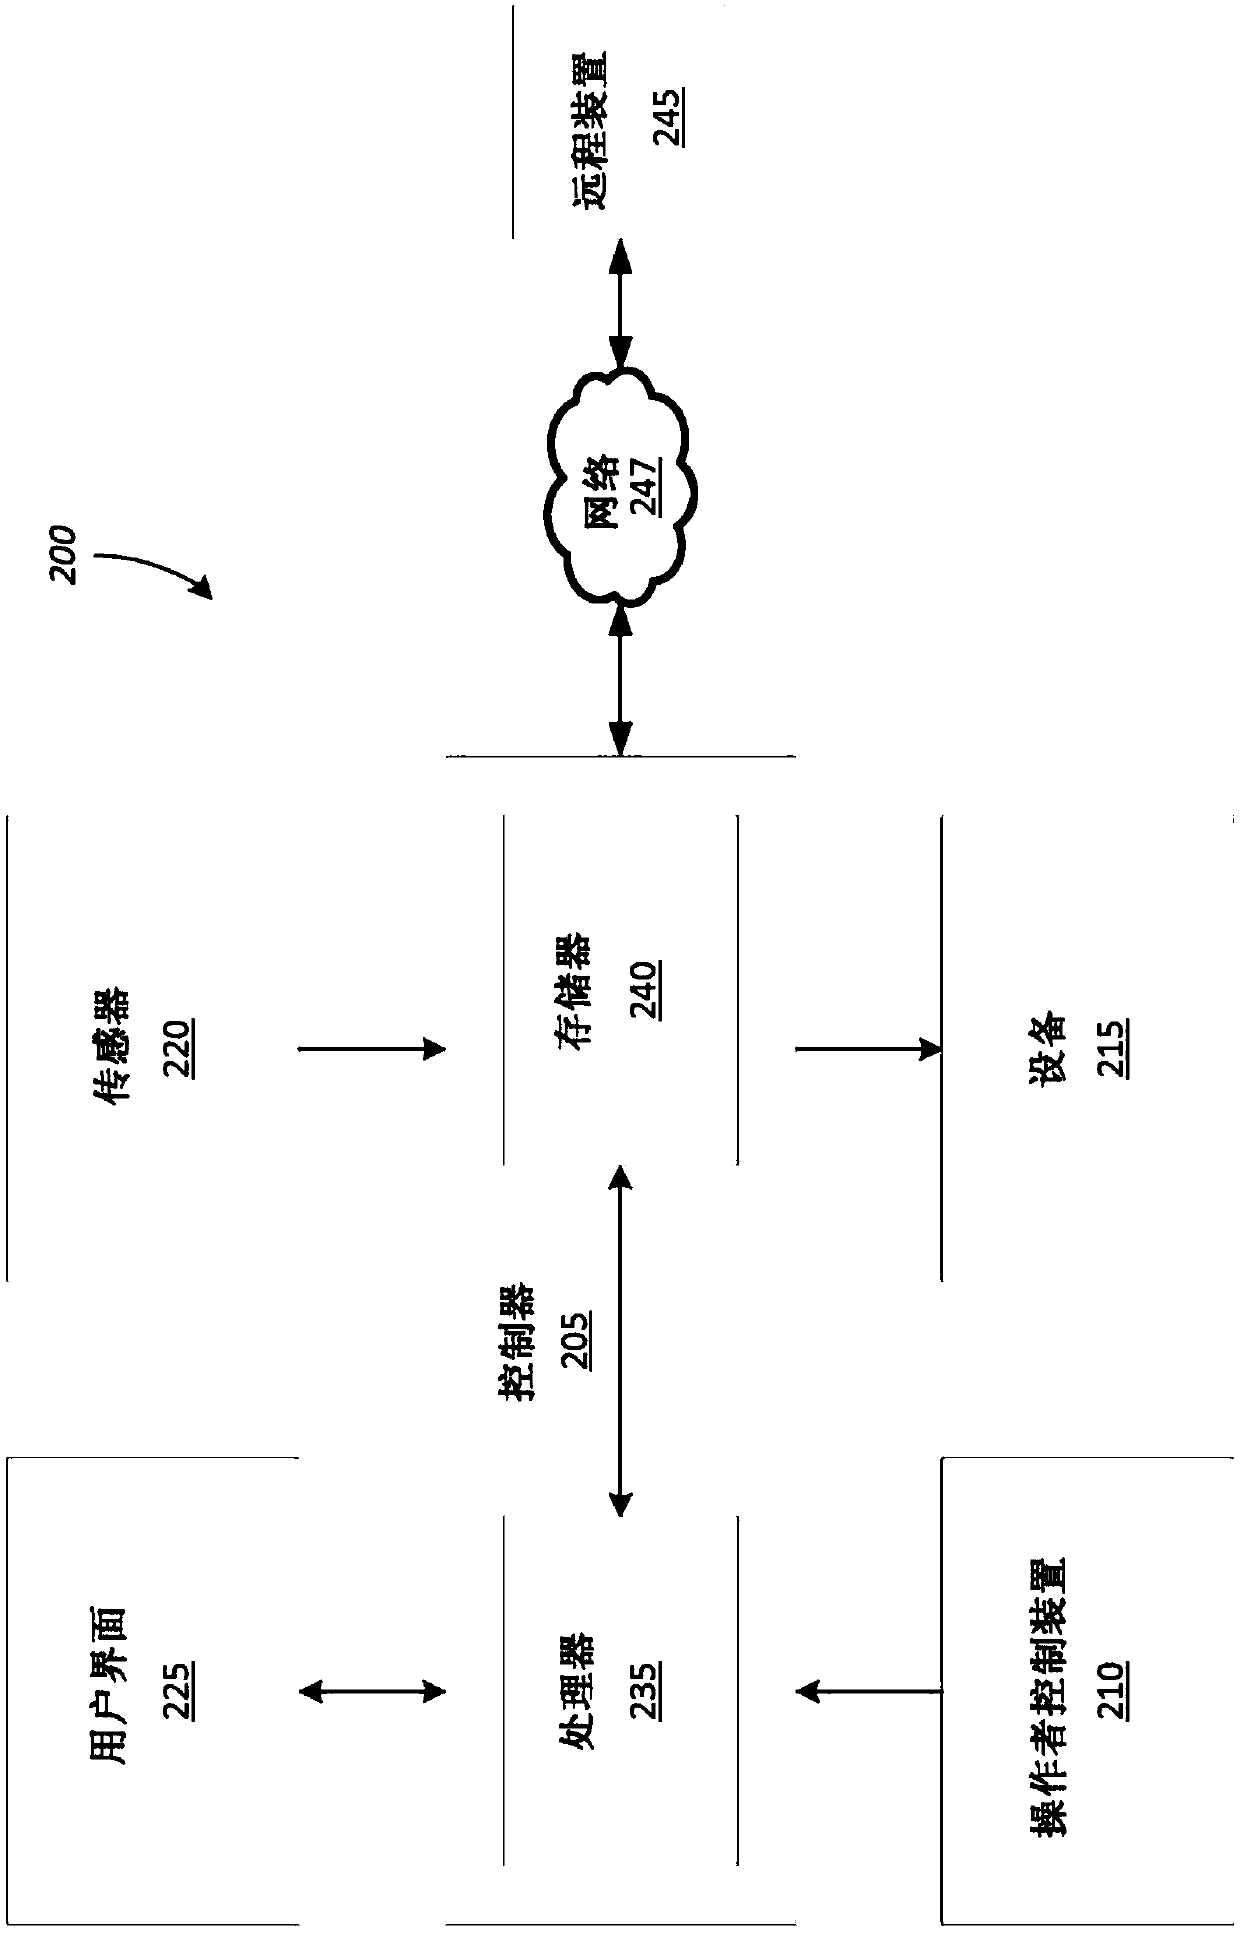 Systems and methods for remote monitoring of drilling equipment